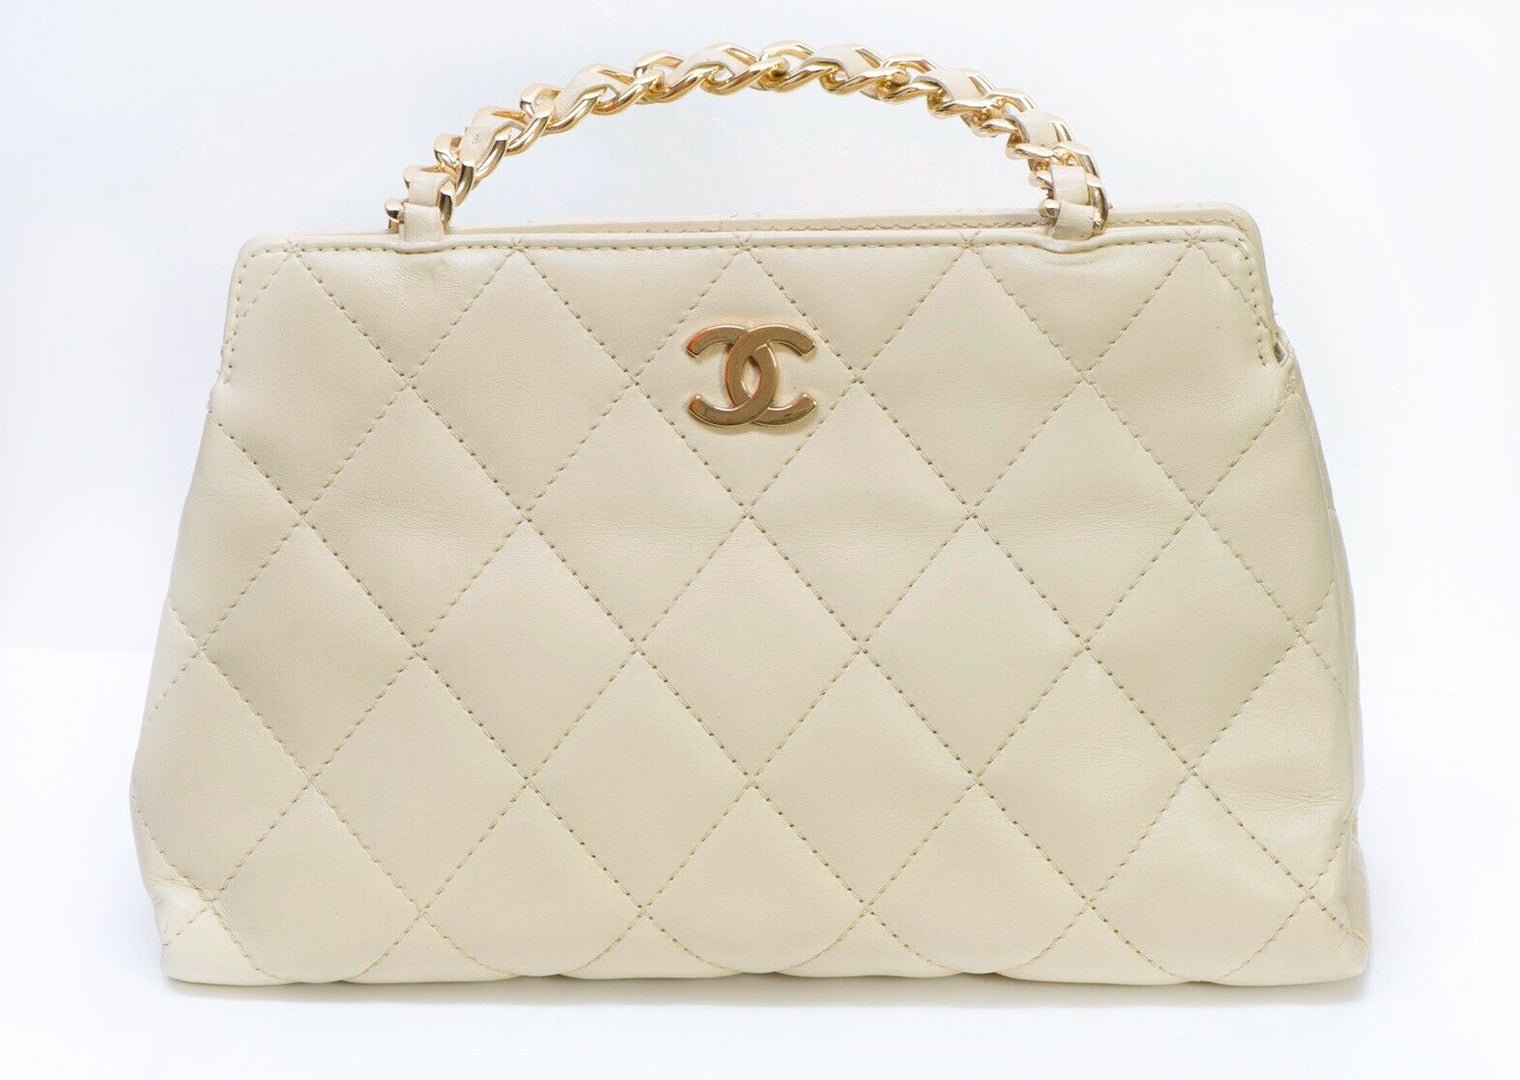 CHANEL Paris CC Beige Quilted Leather Chain Double Handle Bag